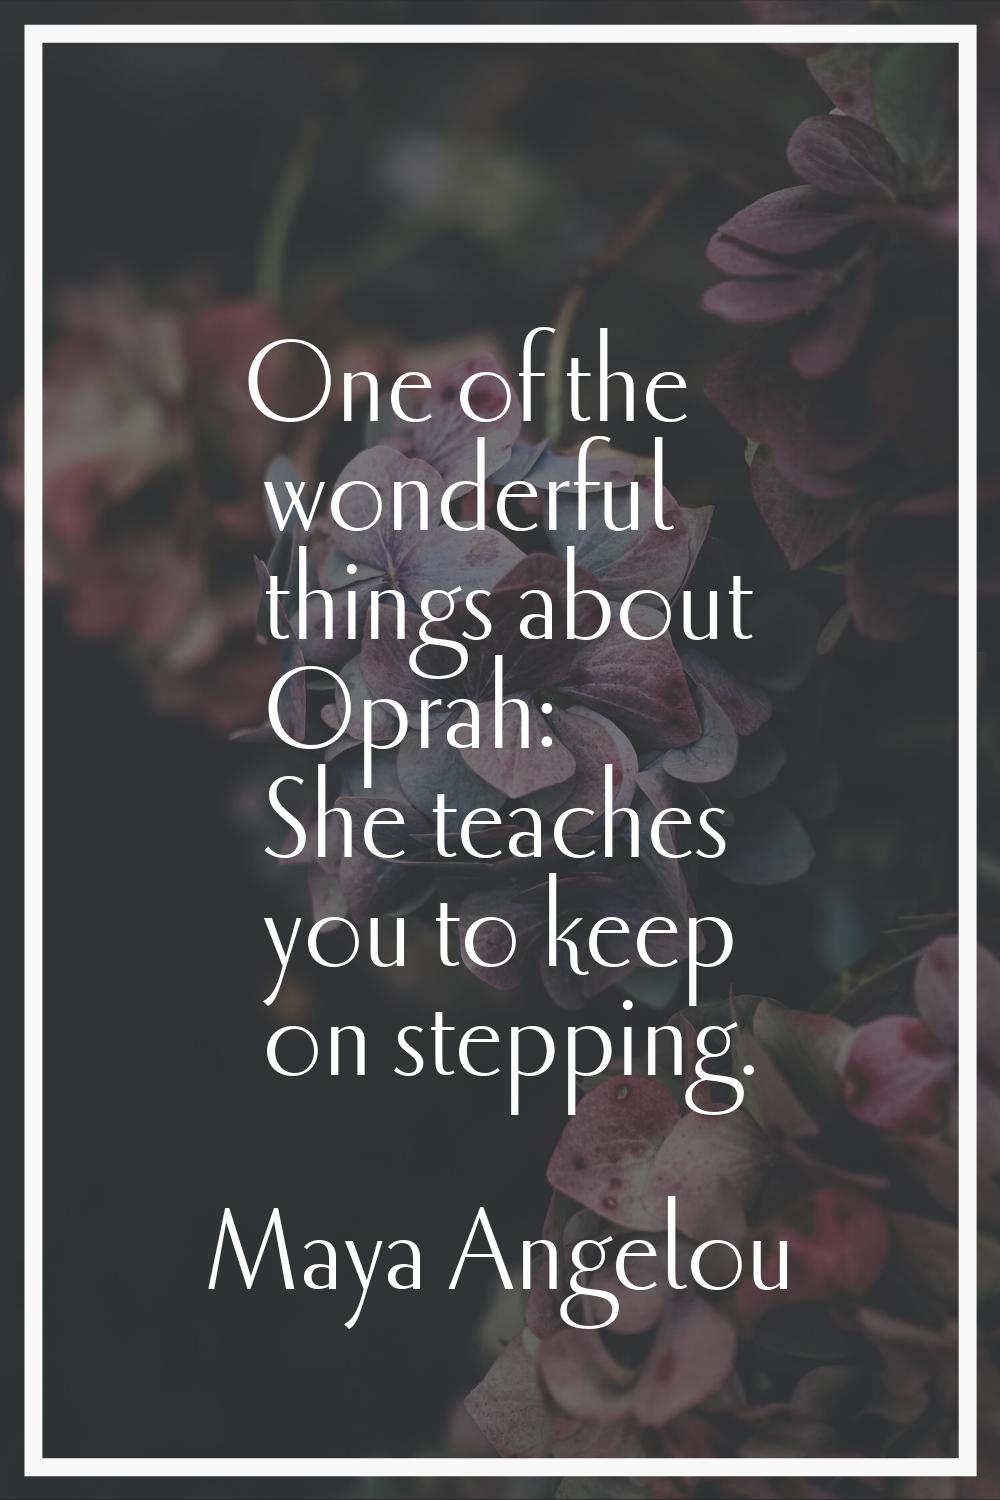 One of the wonderful things about Oprah: She teaches you to keep on stepping.